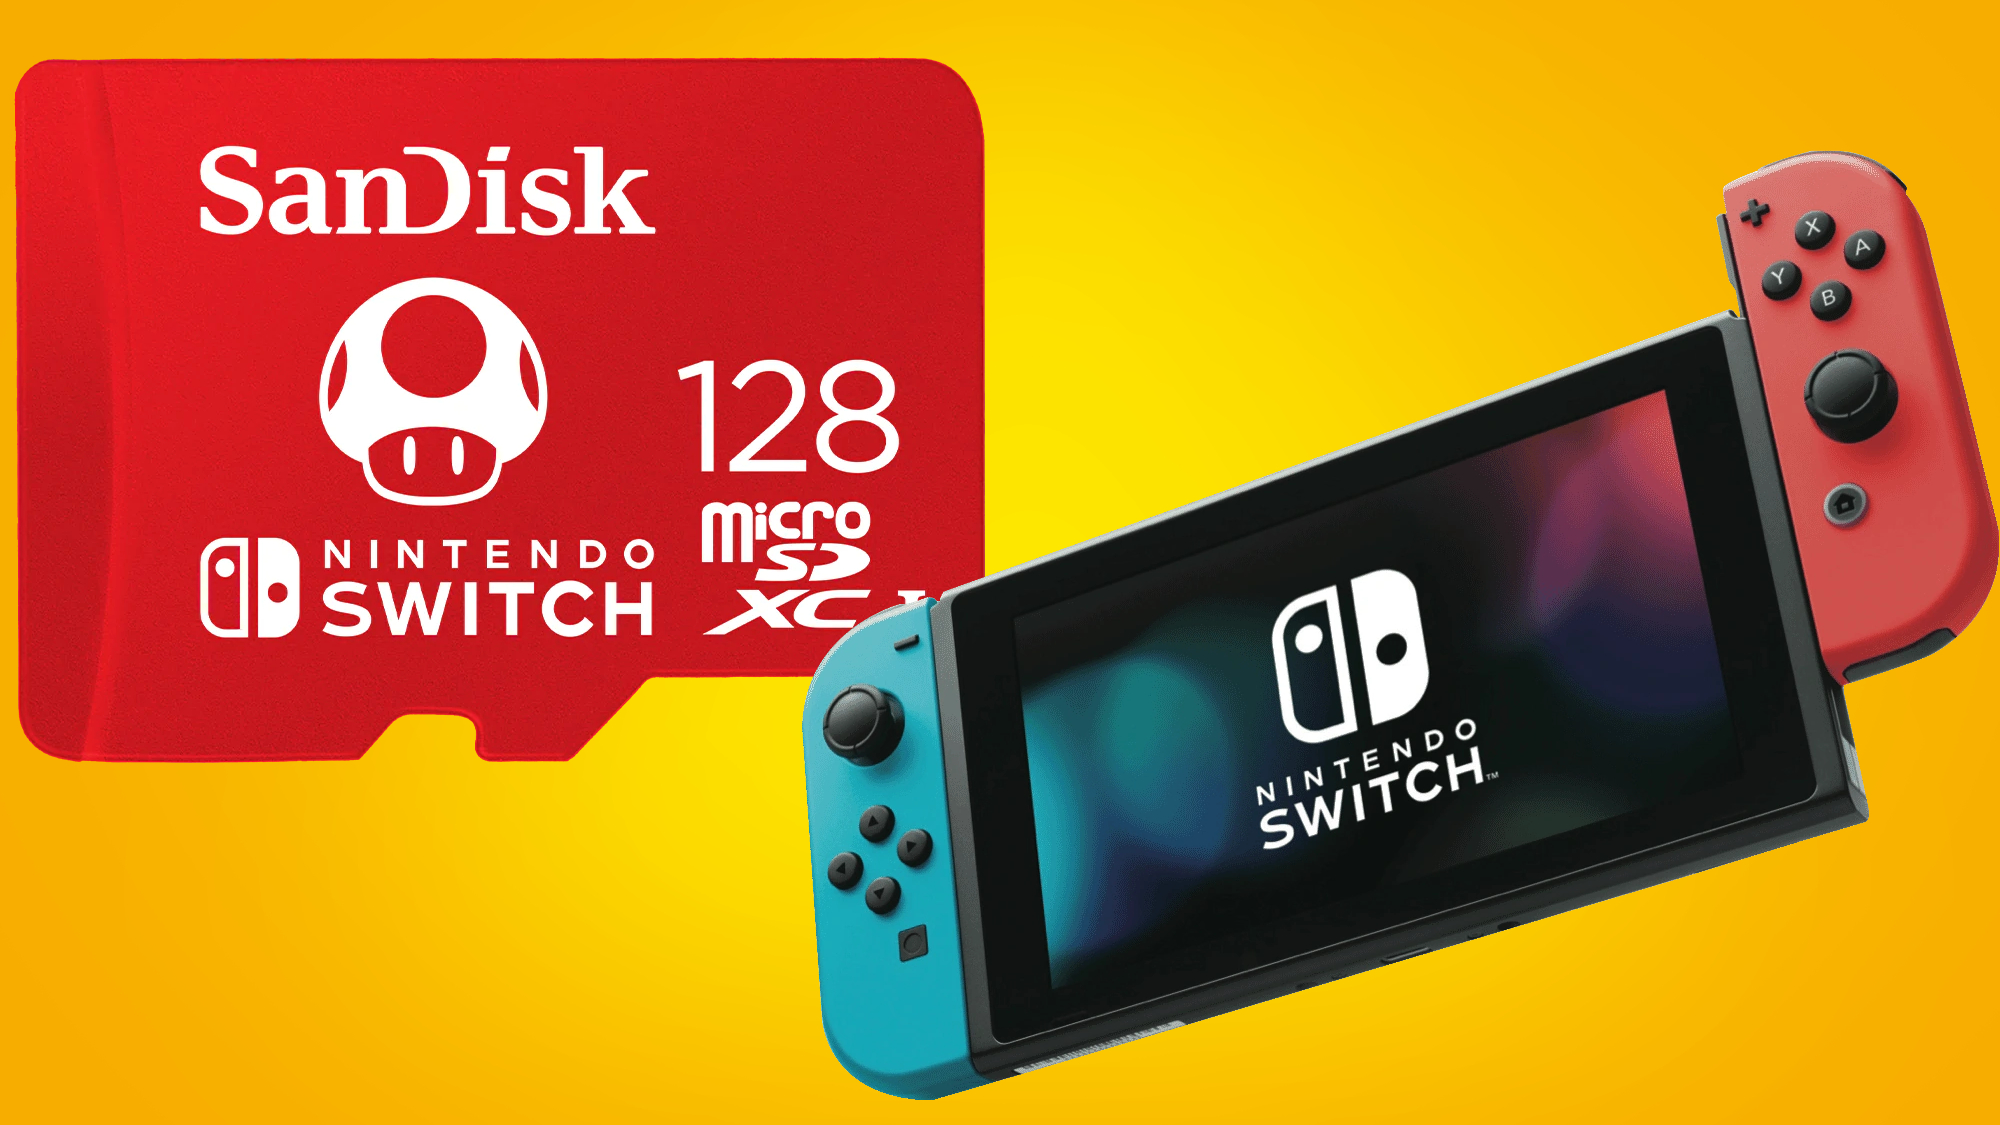 I've finally been convinced to buy a Nintendo Switch SD card by these deals